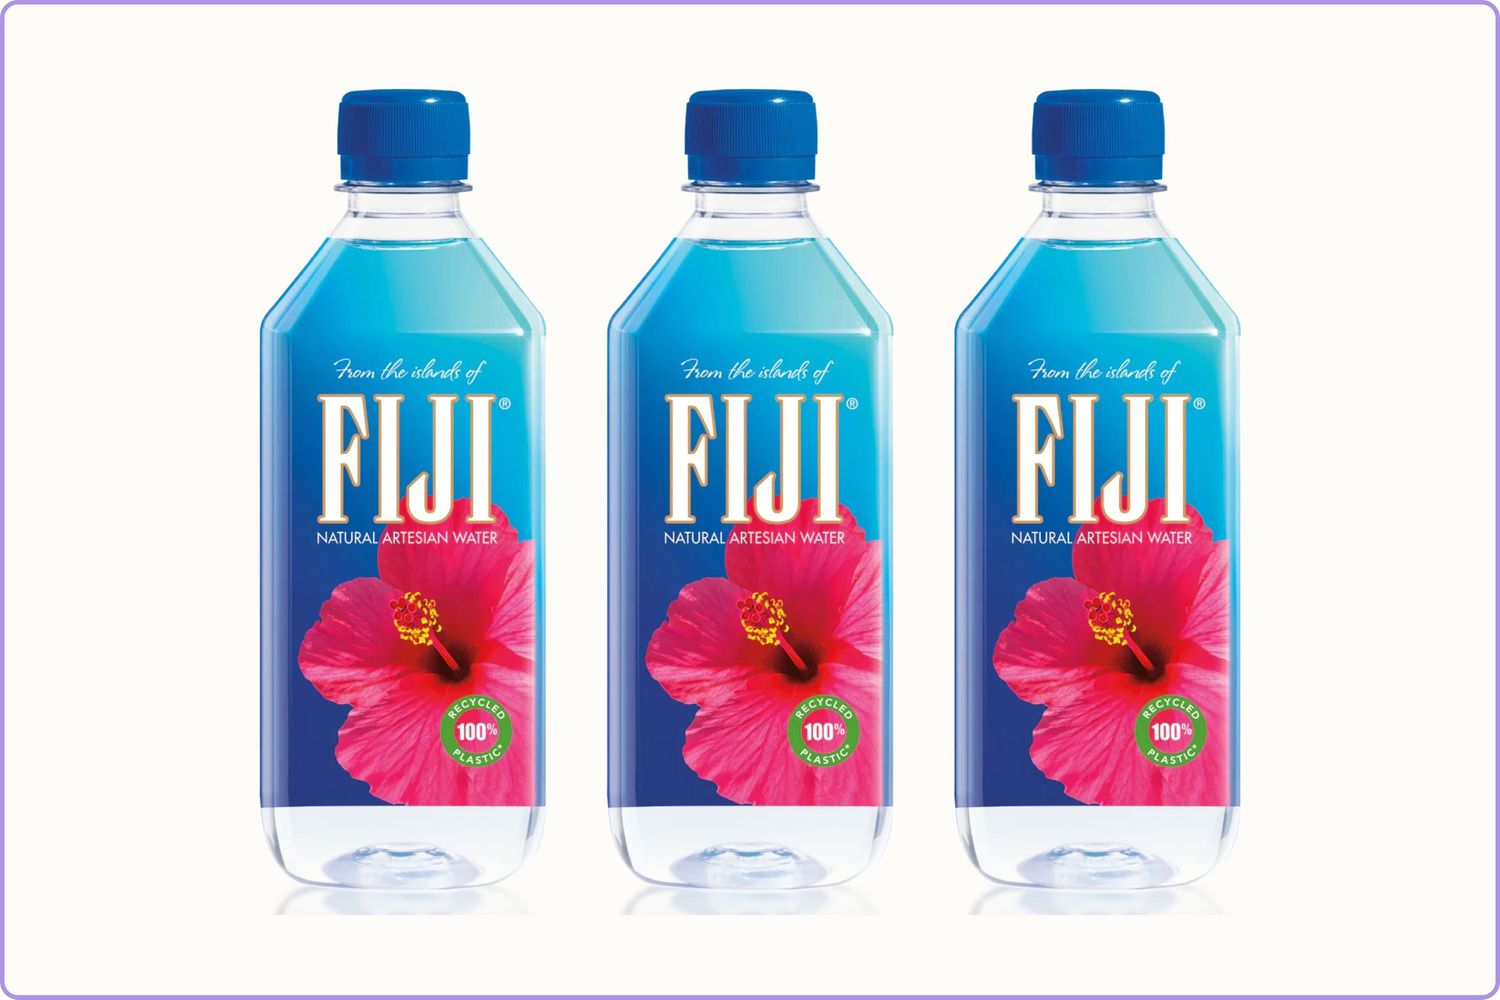 Approximately 1.9 Million FIJI Natural Artesian Water Have Been